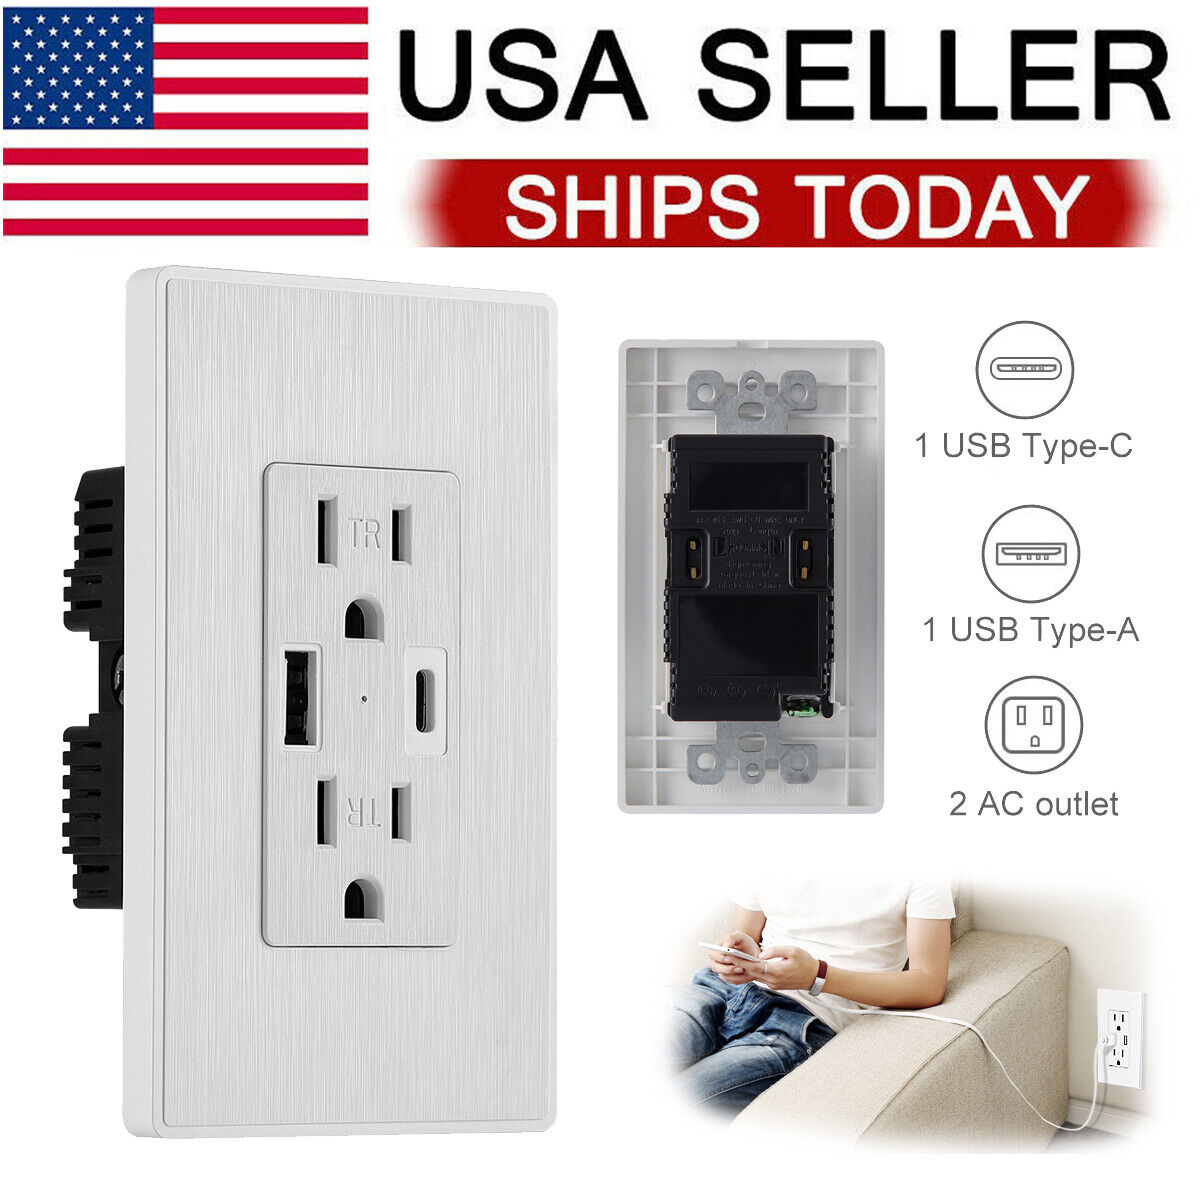 USB Outlet Type C + A Wall Charger 15 Amp TR Receptacle Plug Electrical Socket